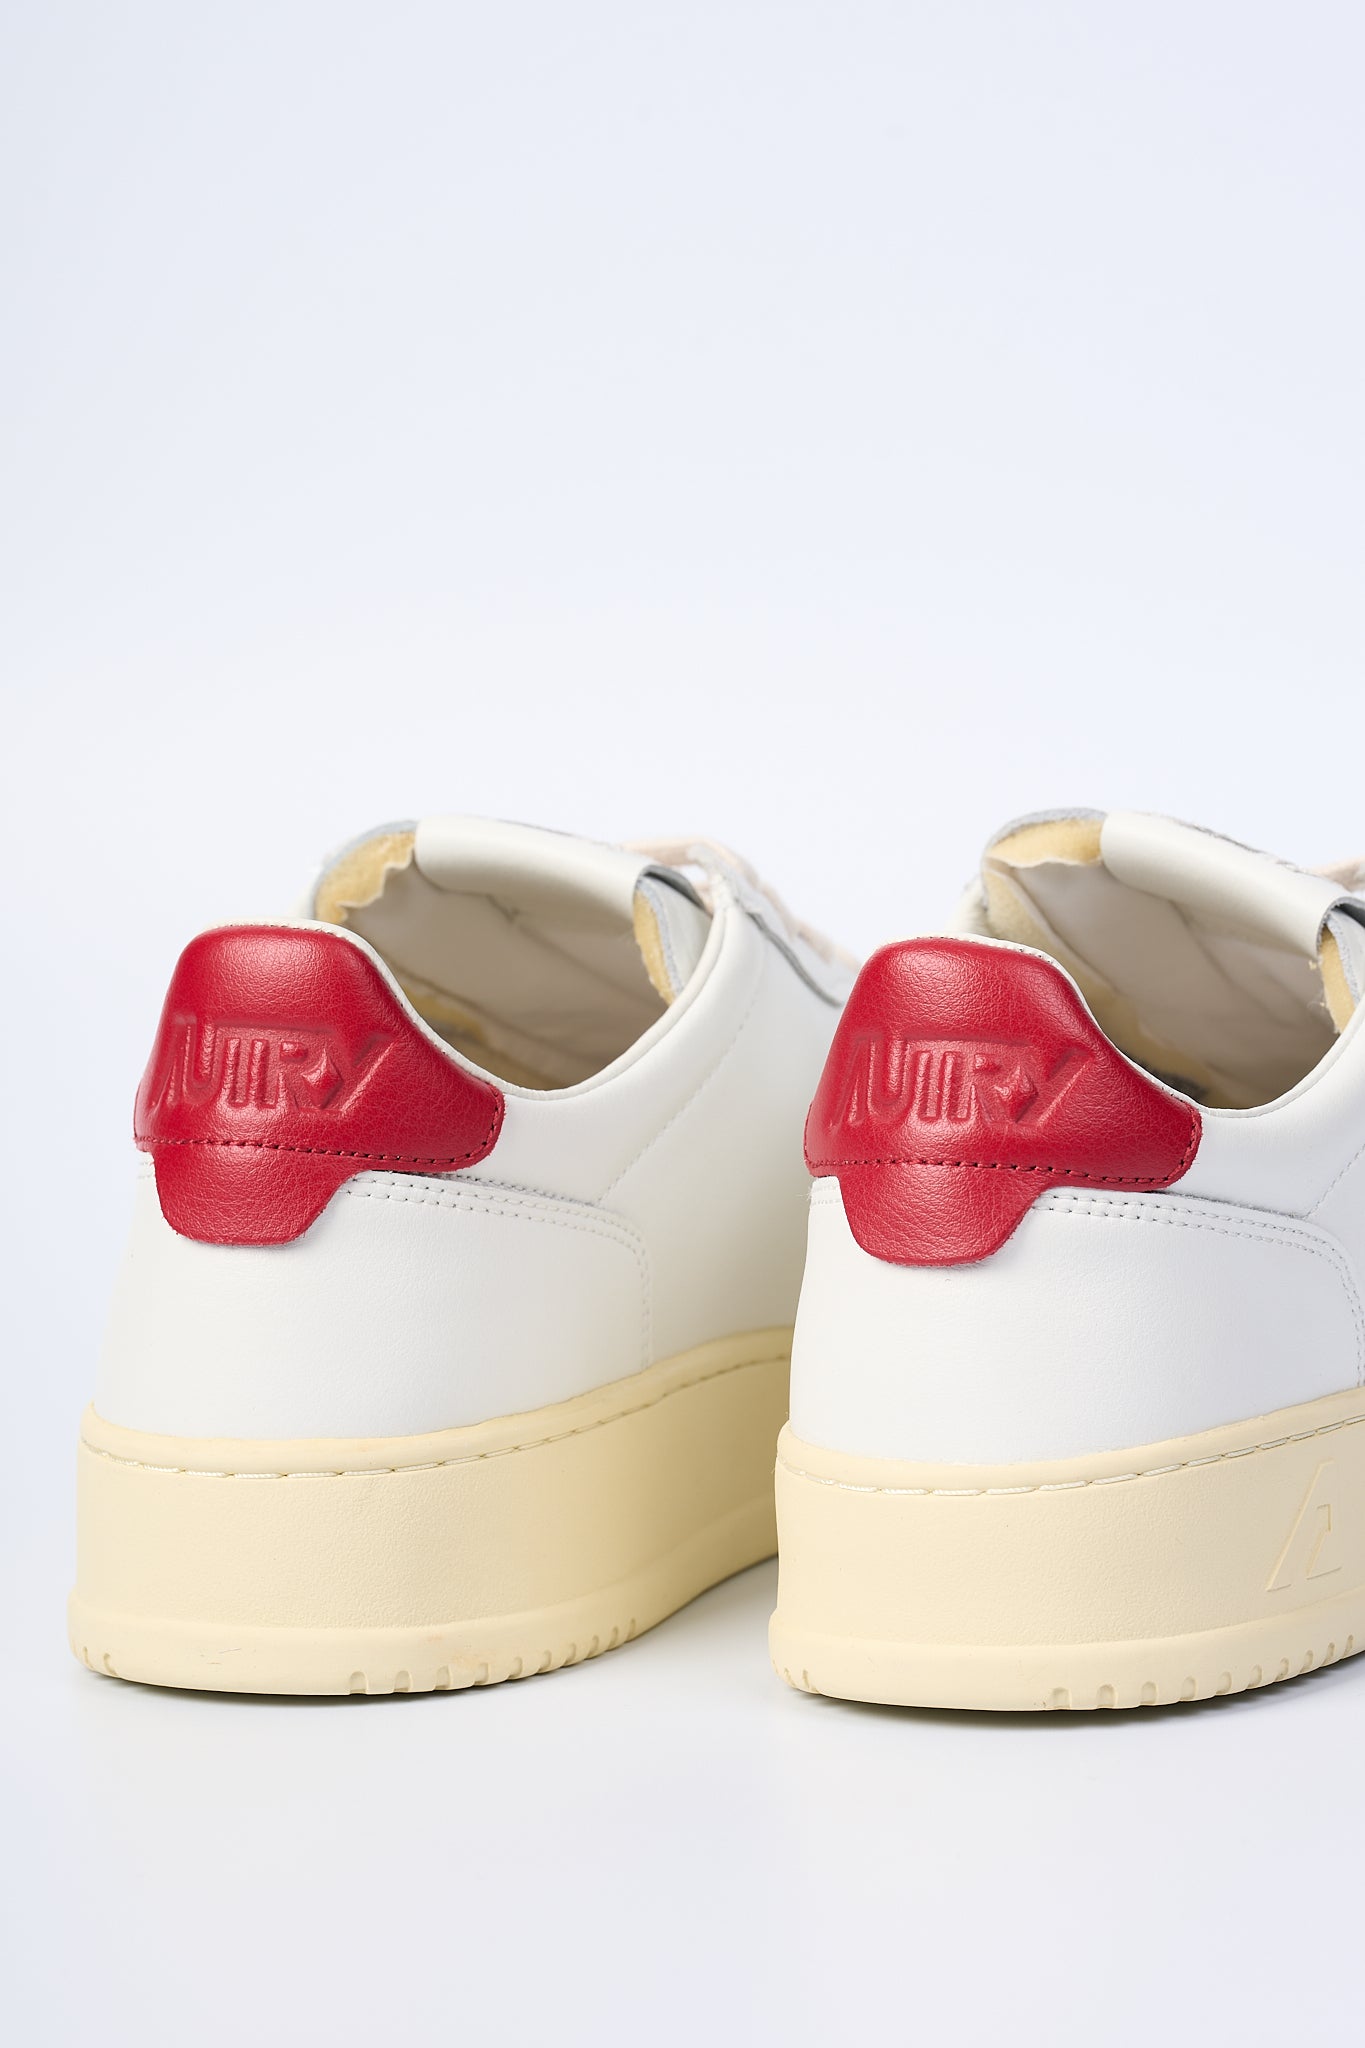 Autry Sneaker Medalist AULM-LL21 Bianco/rosso Uomo-6